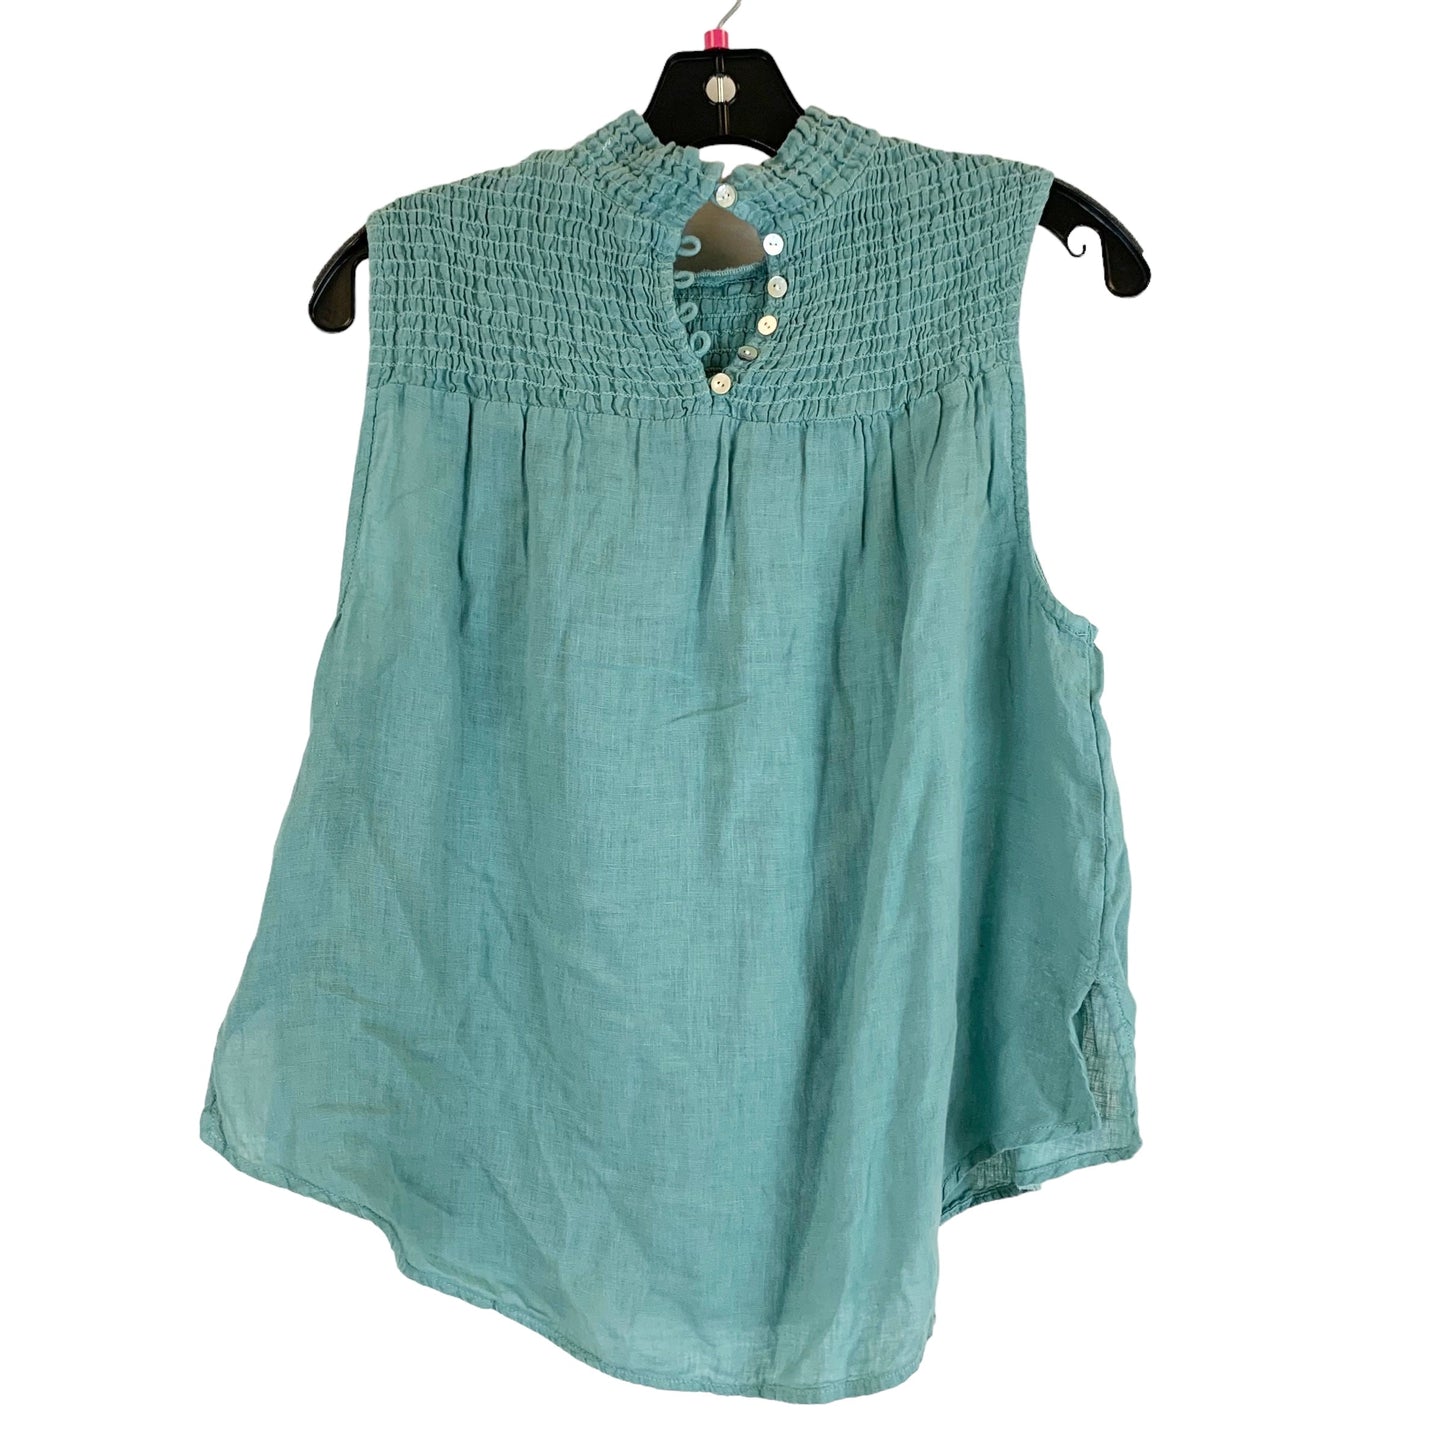 Teal Top Sleeveless Cloth & Stone, Size M